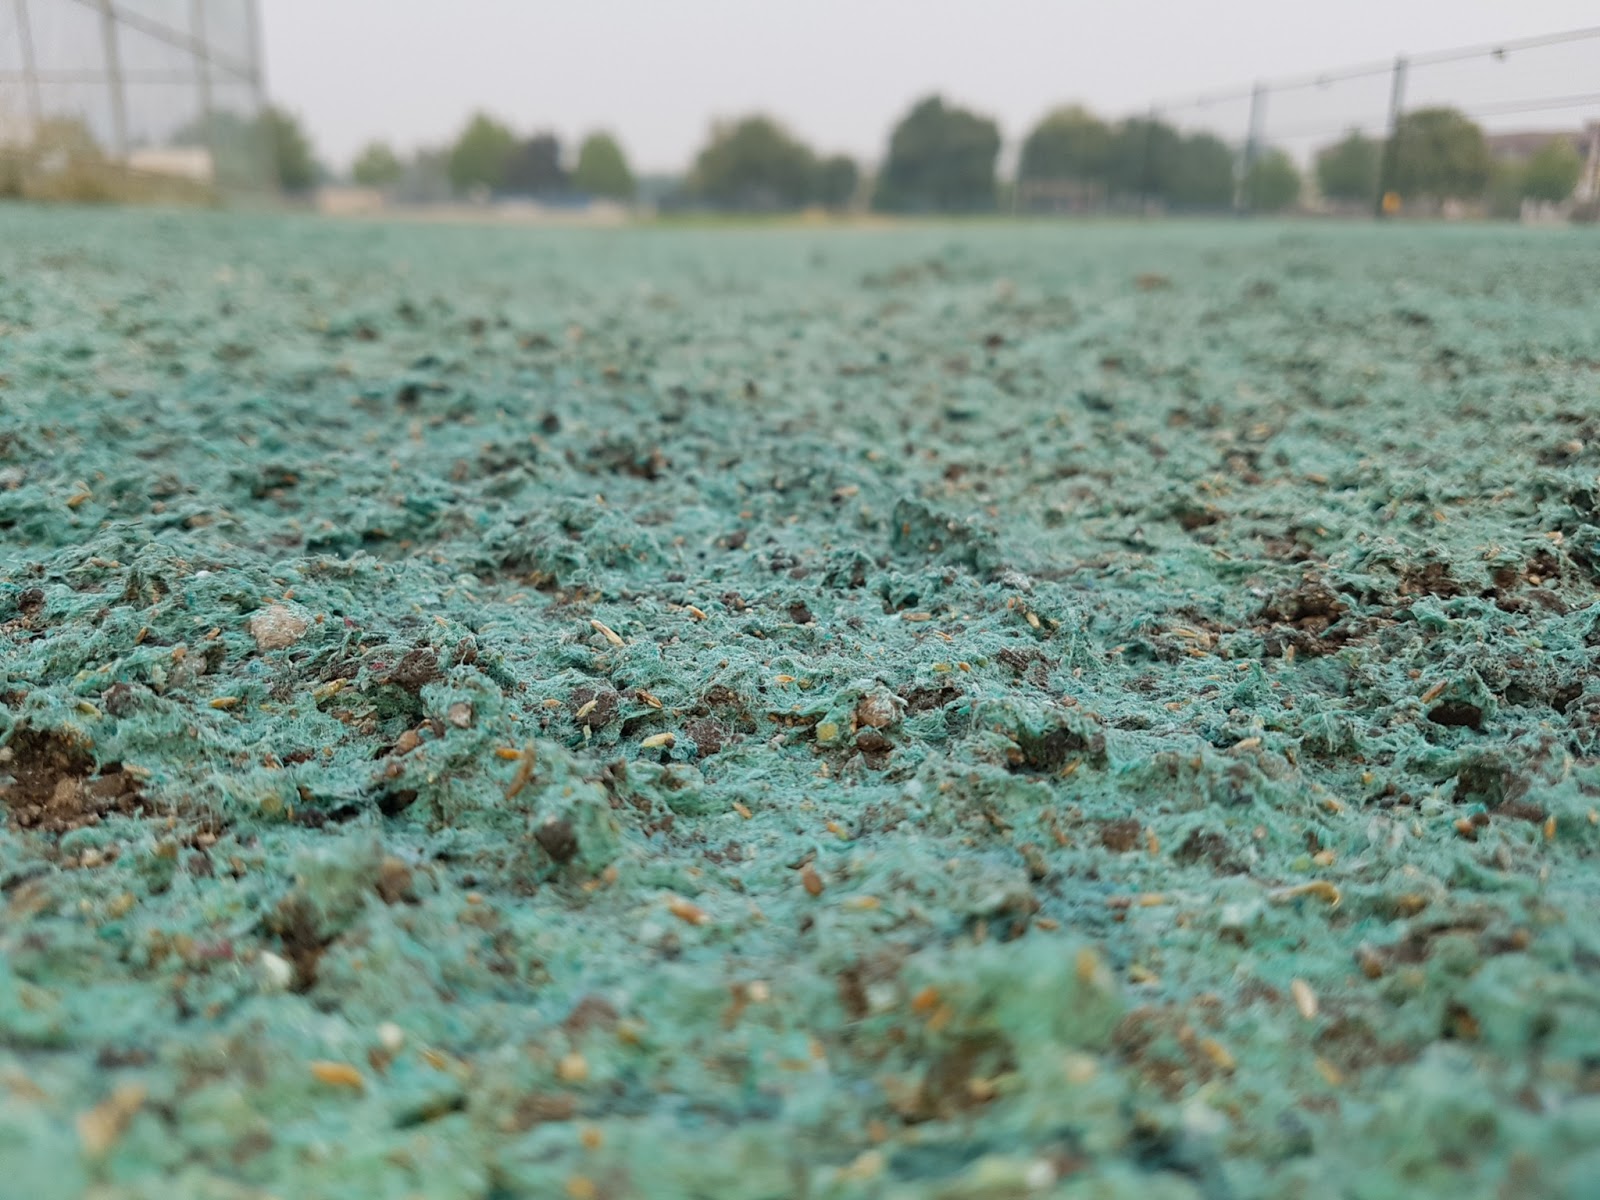 Hydroseeding – What's up with the Weird Green Stuff?